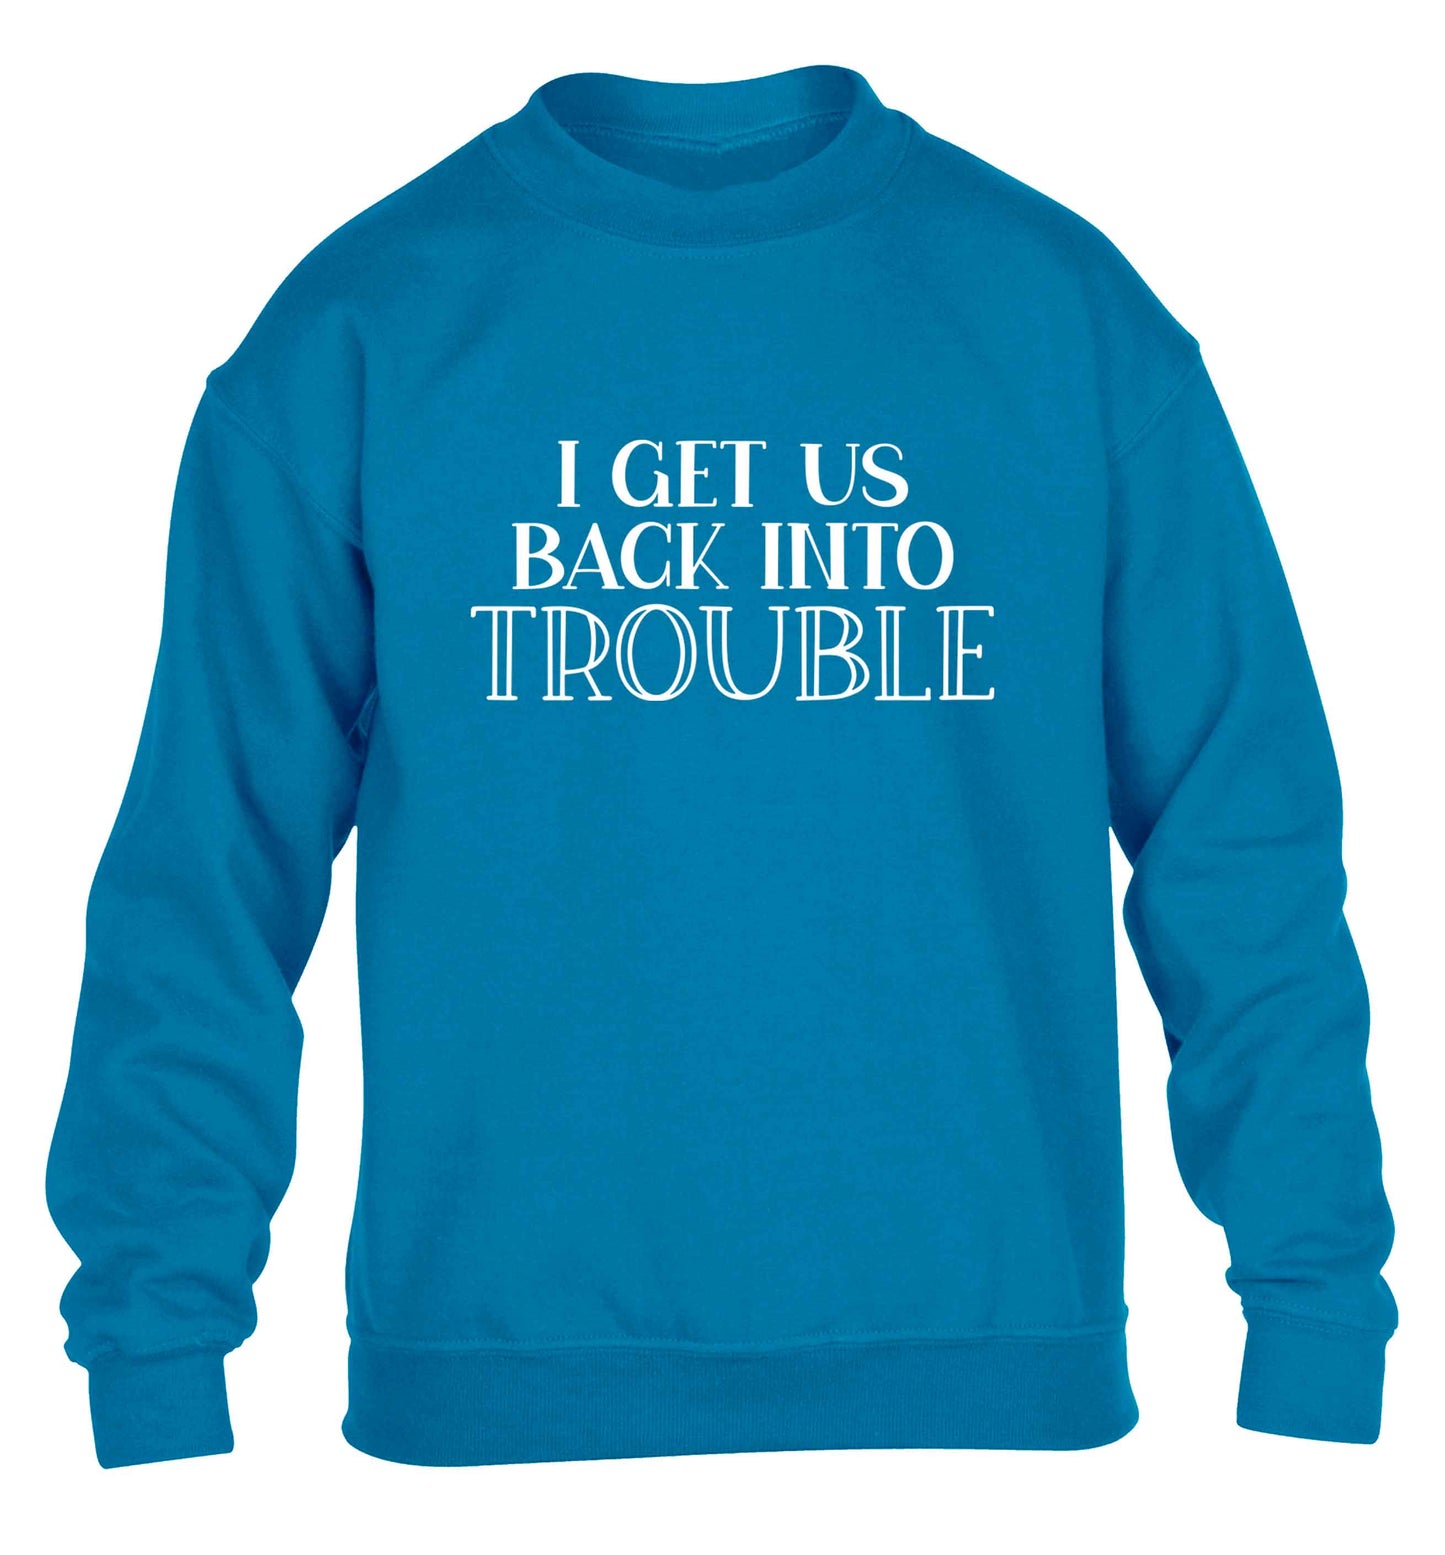 I get us back into trouble children's blue sweater 12-13 Years